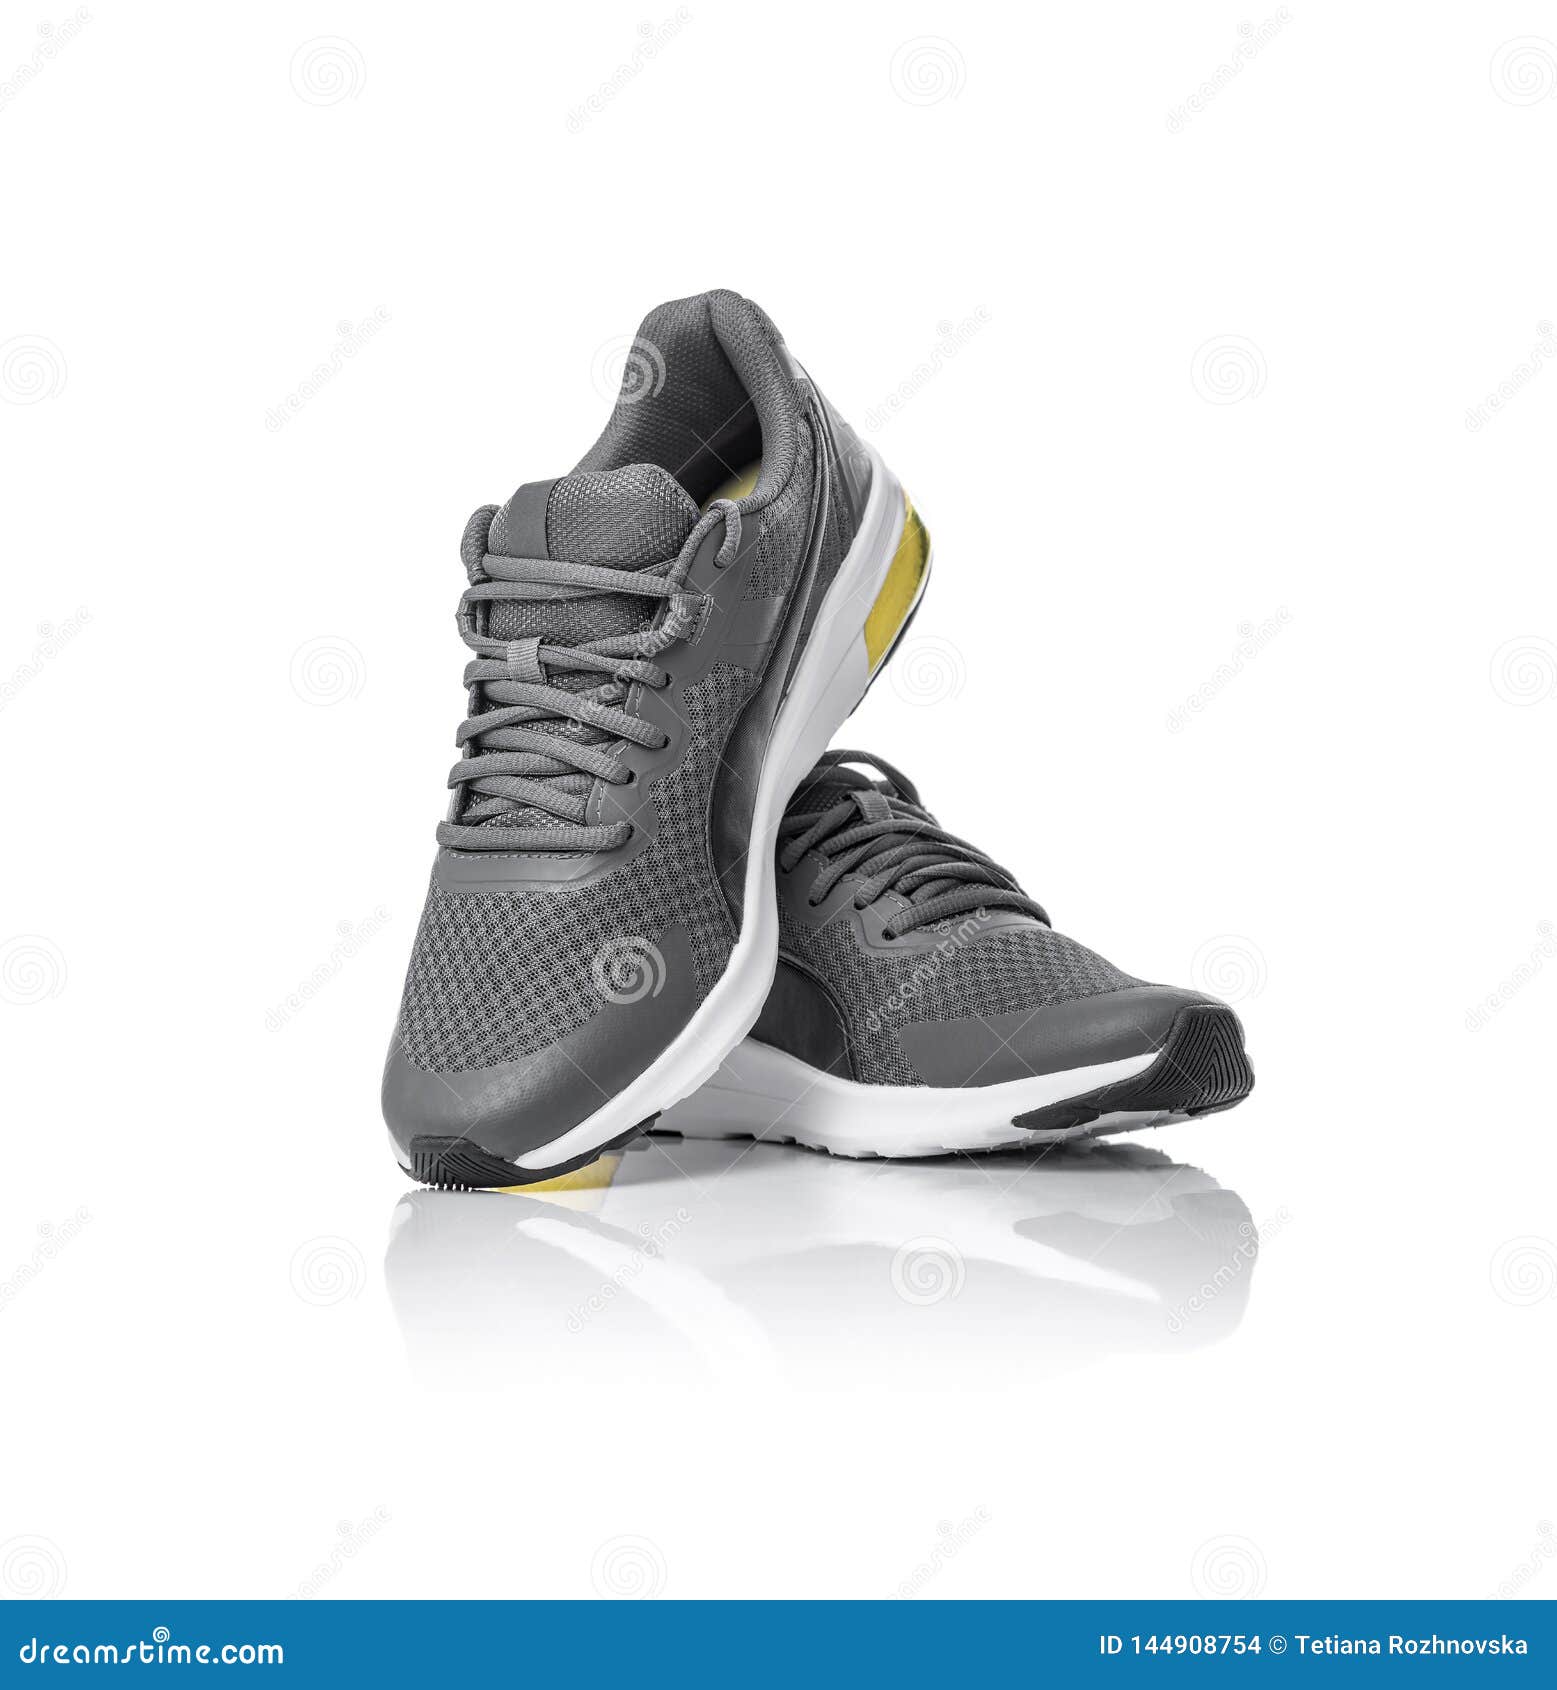 Unbranded Black Sport Running Shoes or Sneakers Isolated on White ...